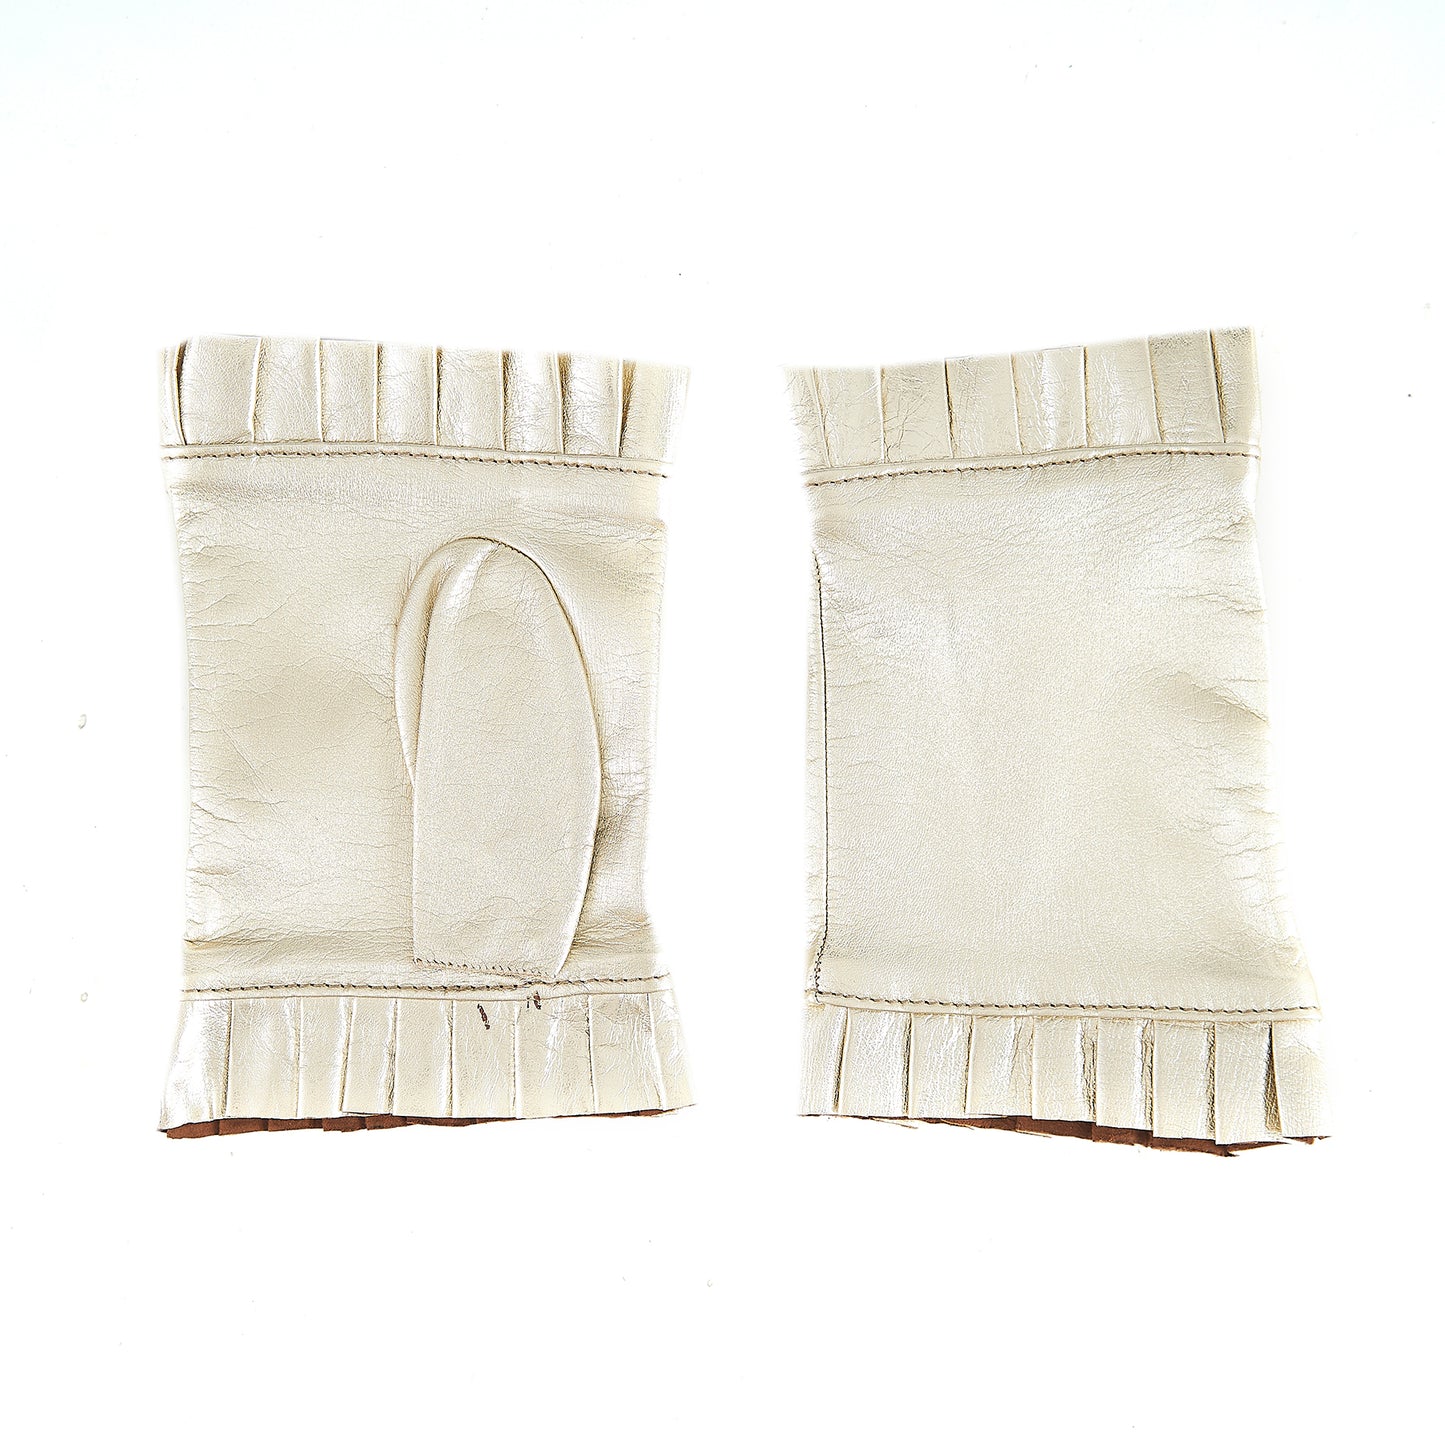 Women's unlined half fingers gloves in gold laminated nappa leather